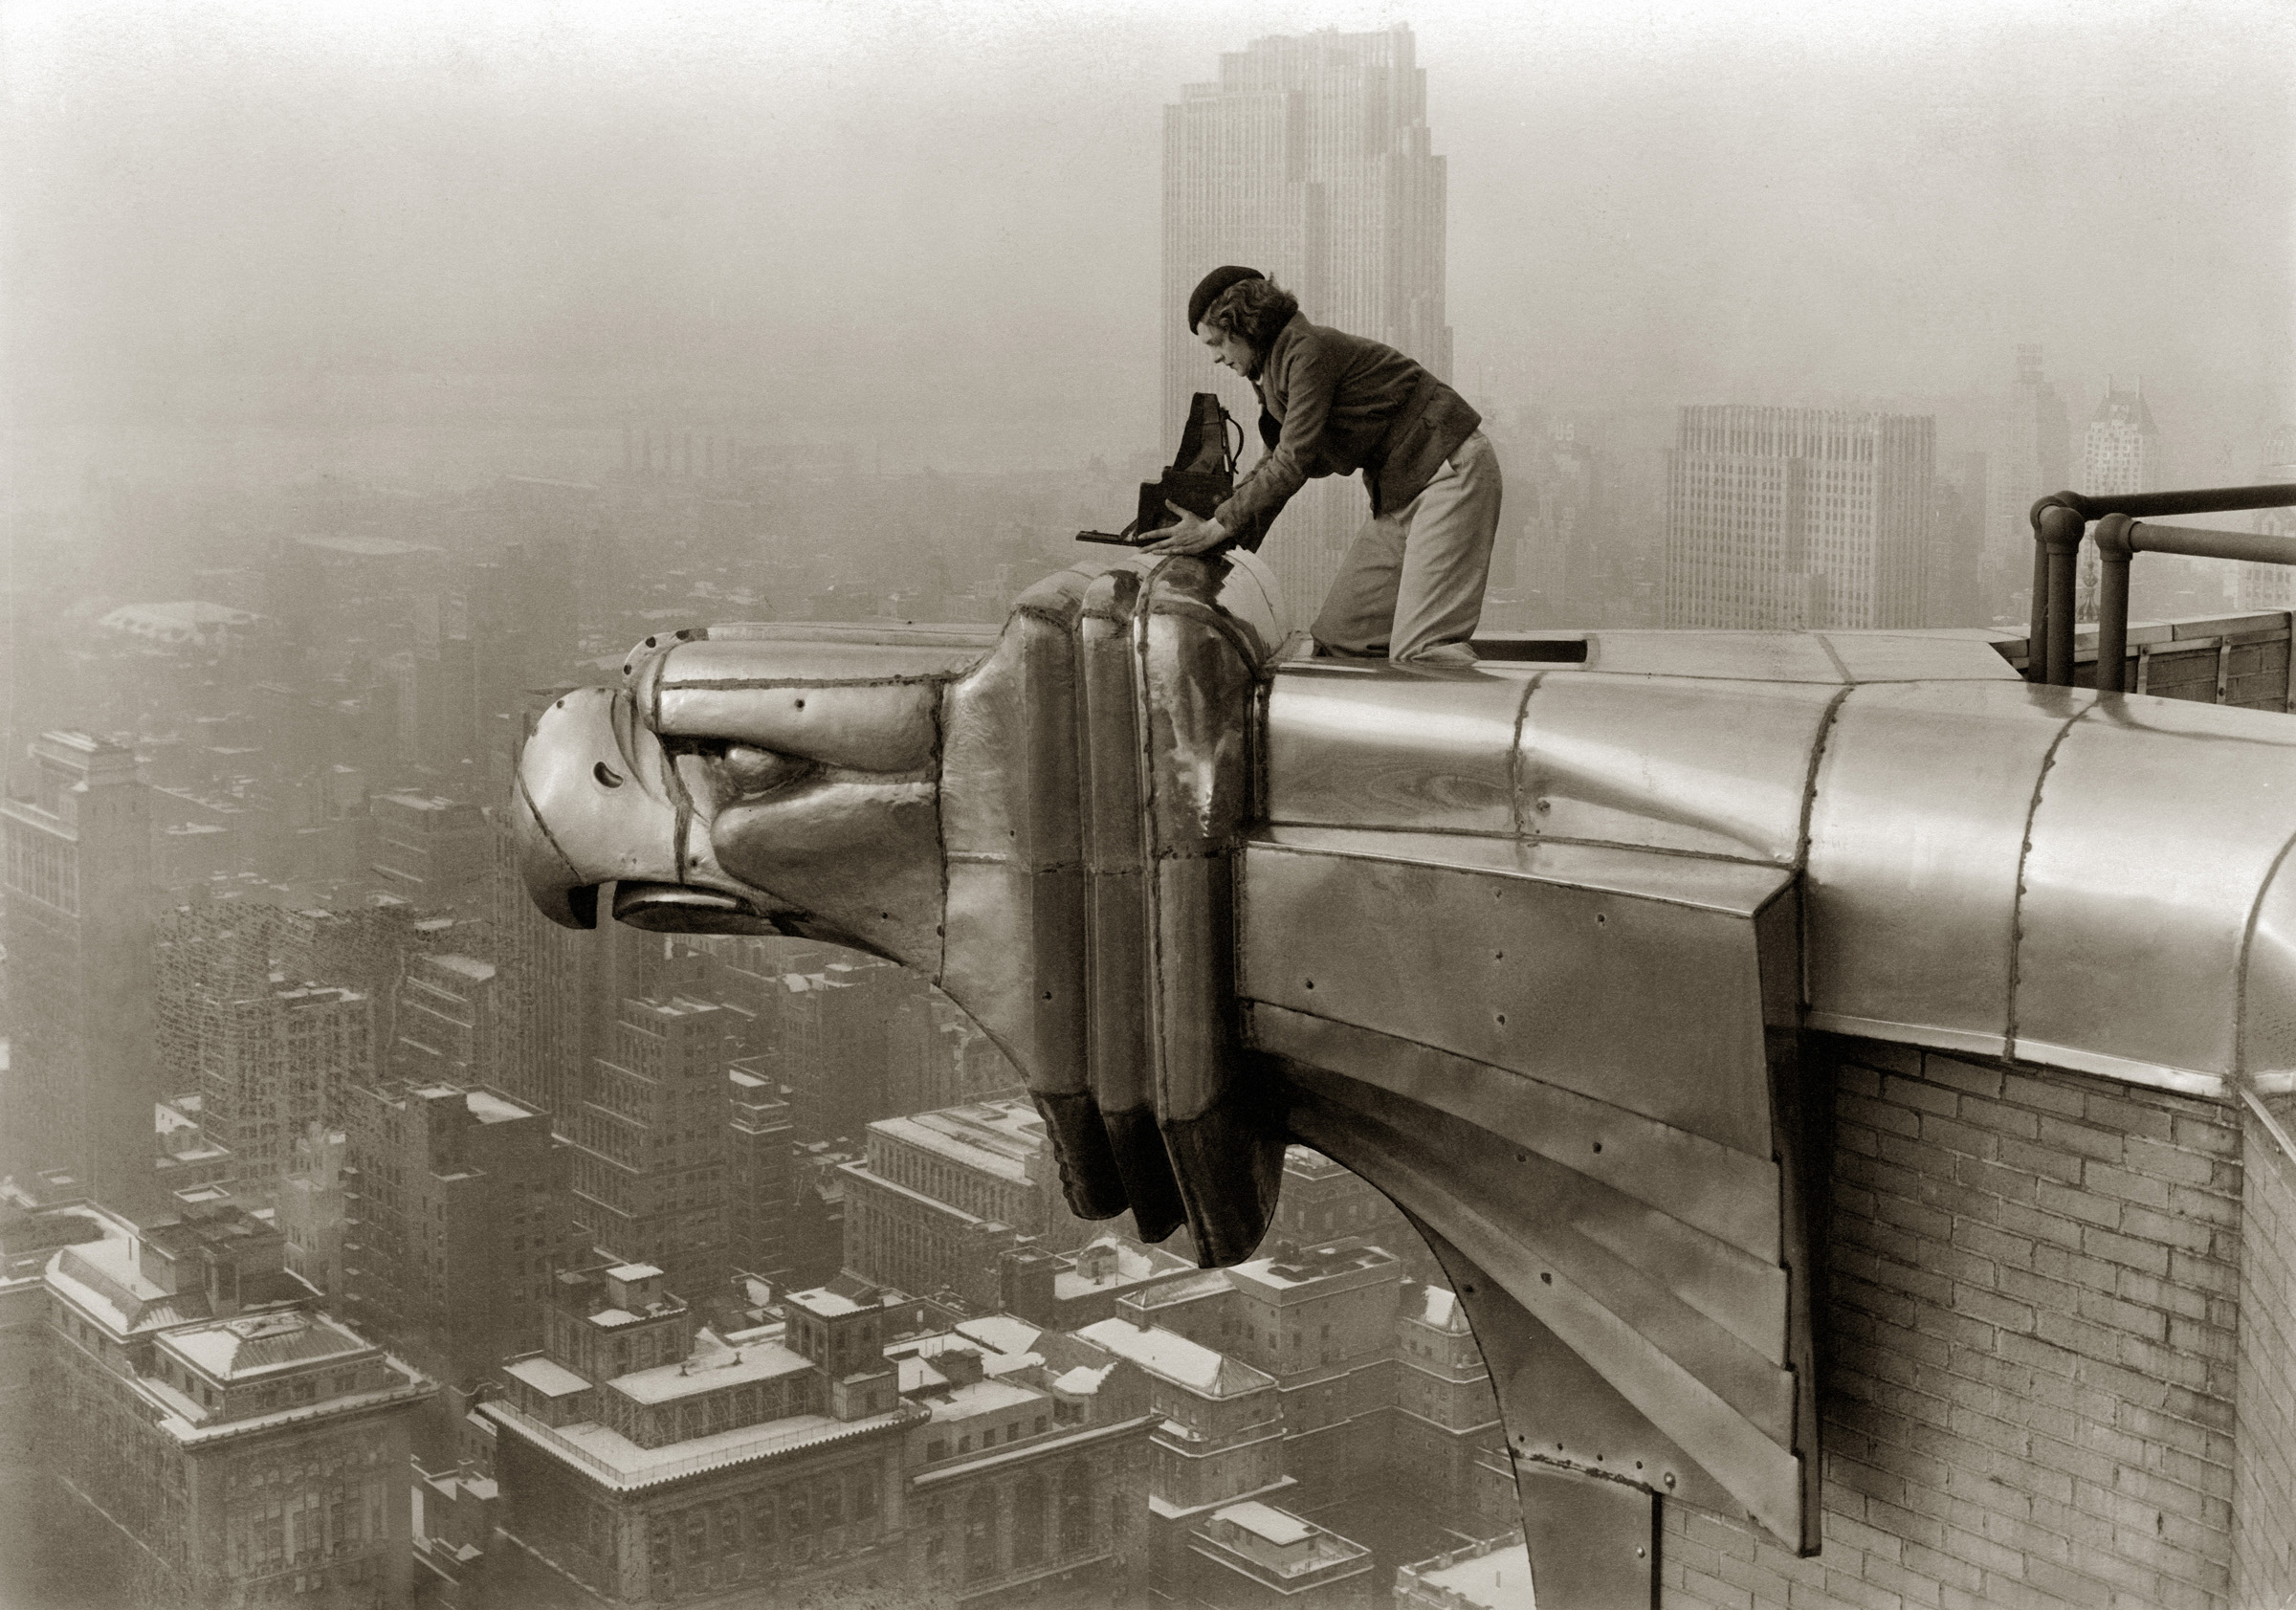 LIFE photographer Margaret Bourke-White making a precarious photo from the Chrysler Building. (Oscar Graubner—The LIFE Images Collection/Getty)